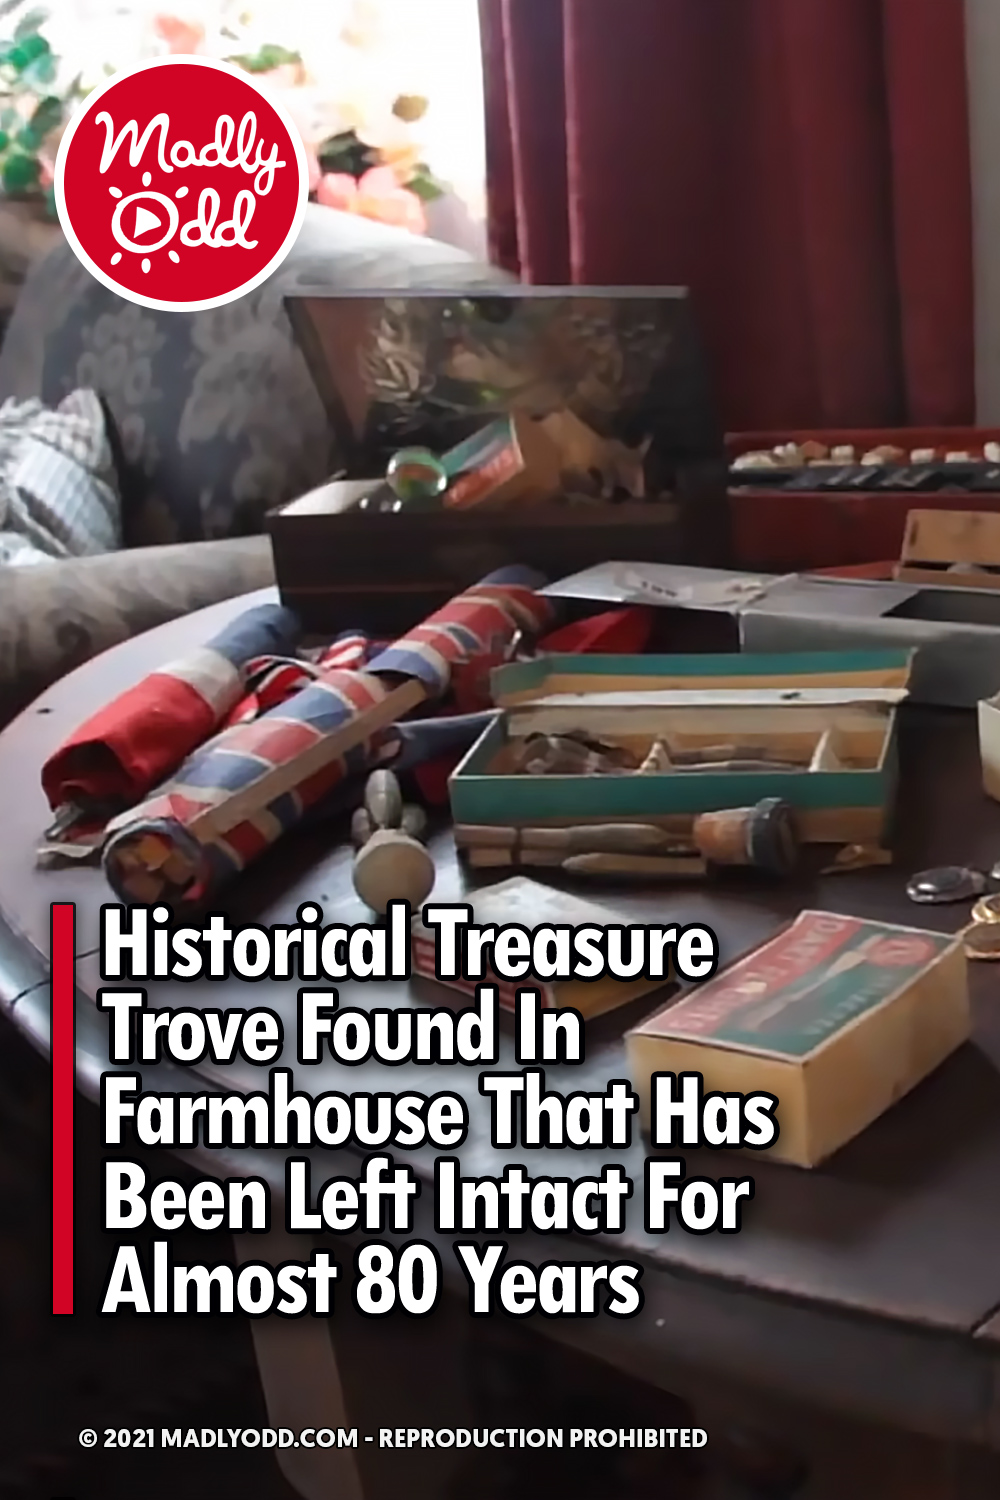 Historical Treasure Trove Found In Farmhouse That Has Been Left Intact For Almost 80 Years